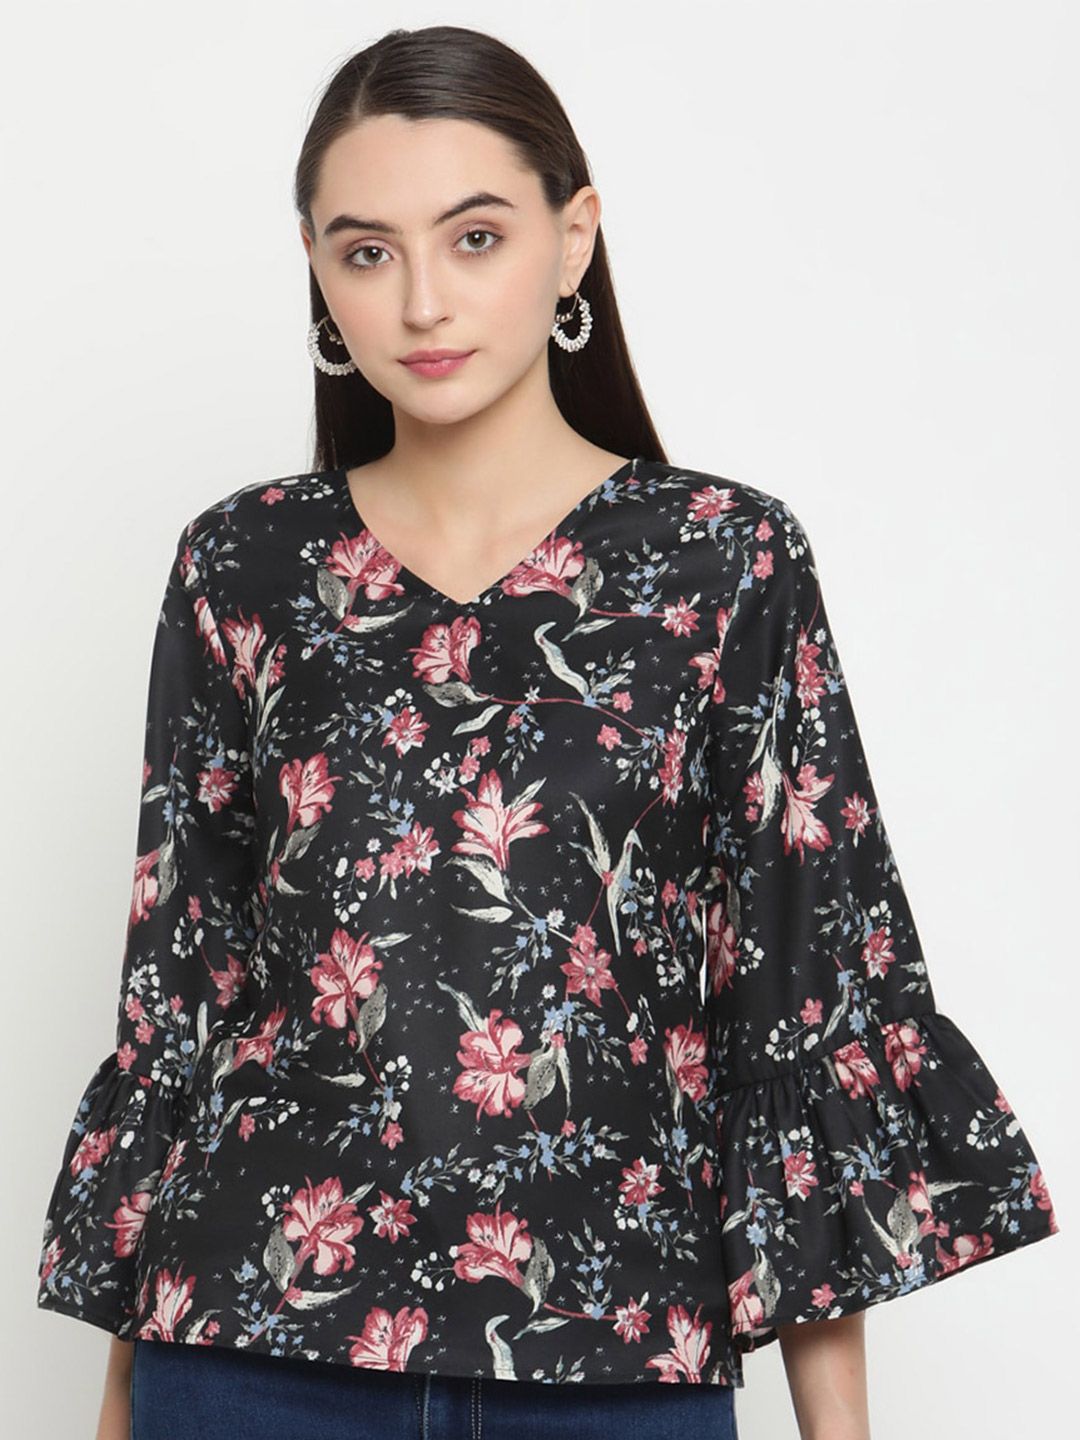 Be Indi Black & Off White Floral Print Crepe Top Price in India